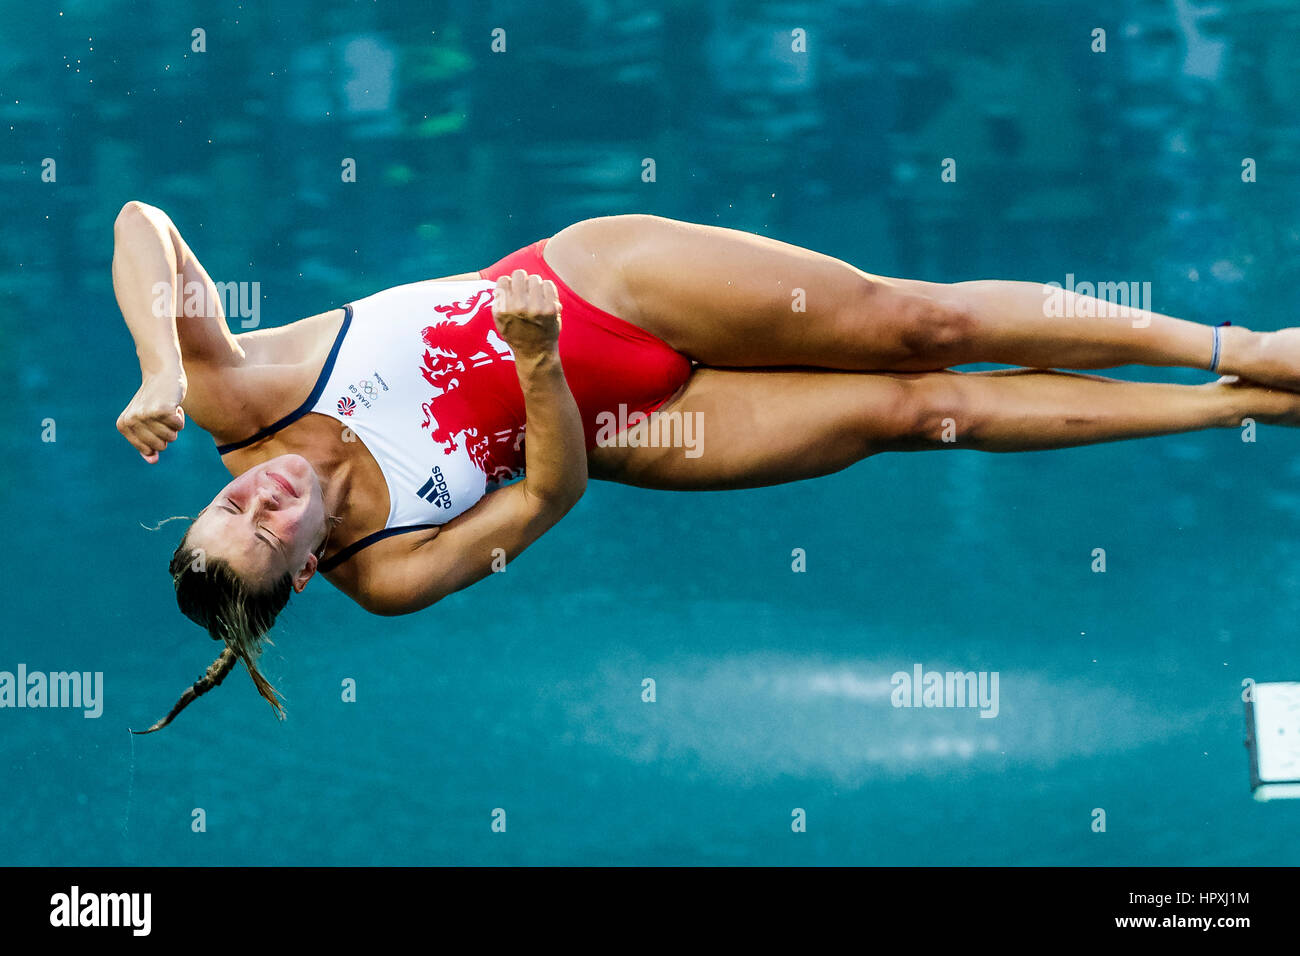 Rio de Janeiro, Brazil. 14 August 2016 Grace Reid (GBR) competes in the Women Diving Springboard 3m final at the 2016 Olympic Summer Games. ©Paul J. S Stock Photo